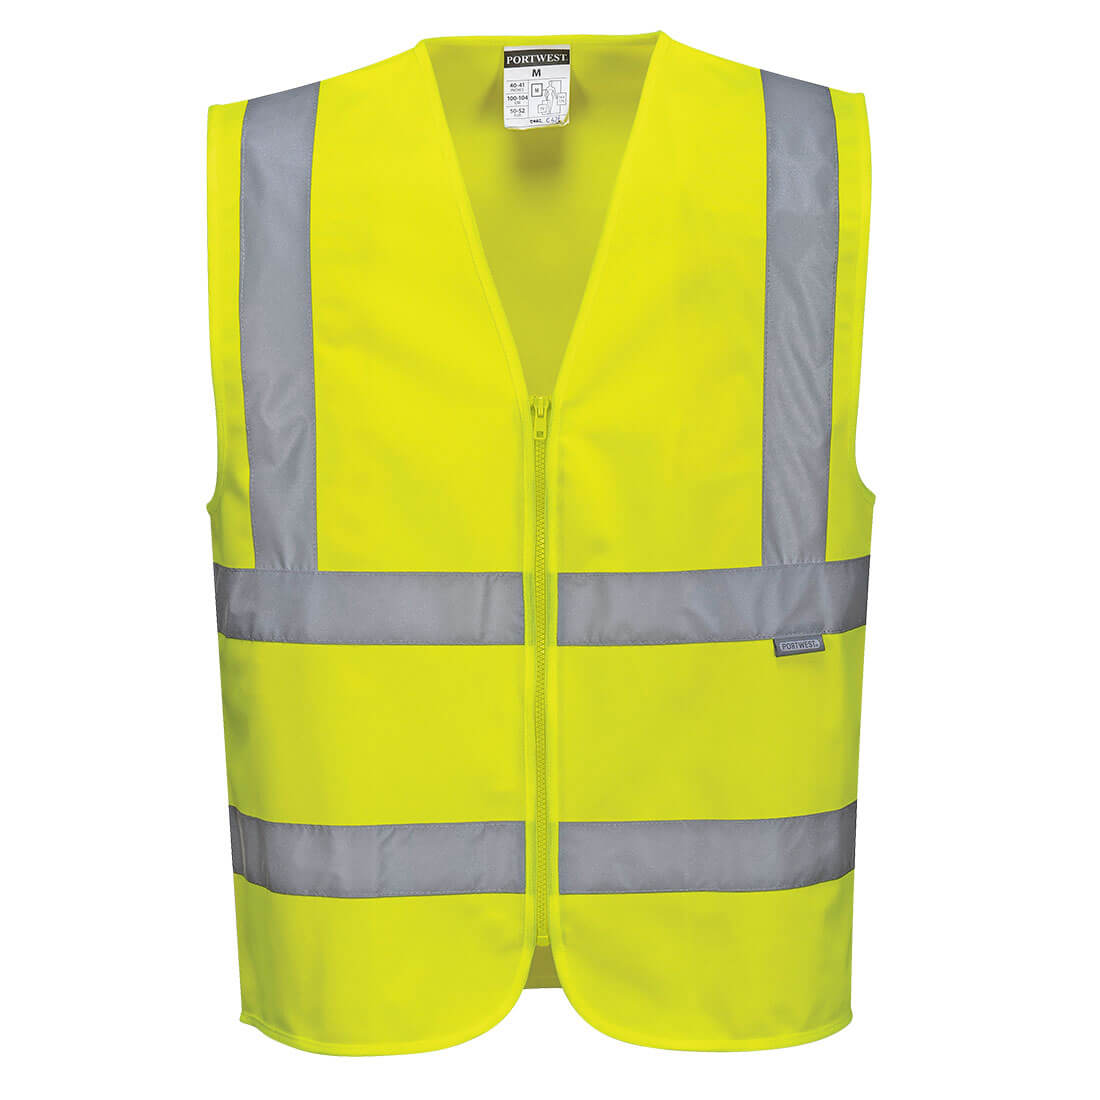 Image of Portwest Hi Vis Band and Brace Vest Yellow S